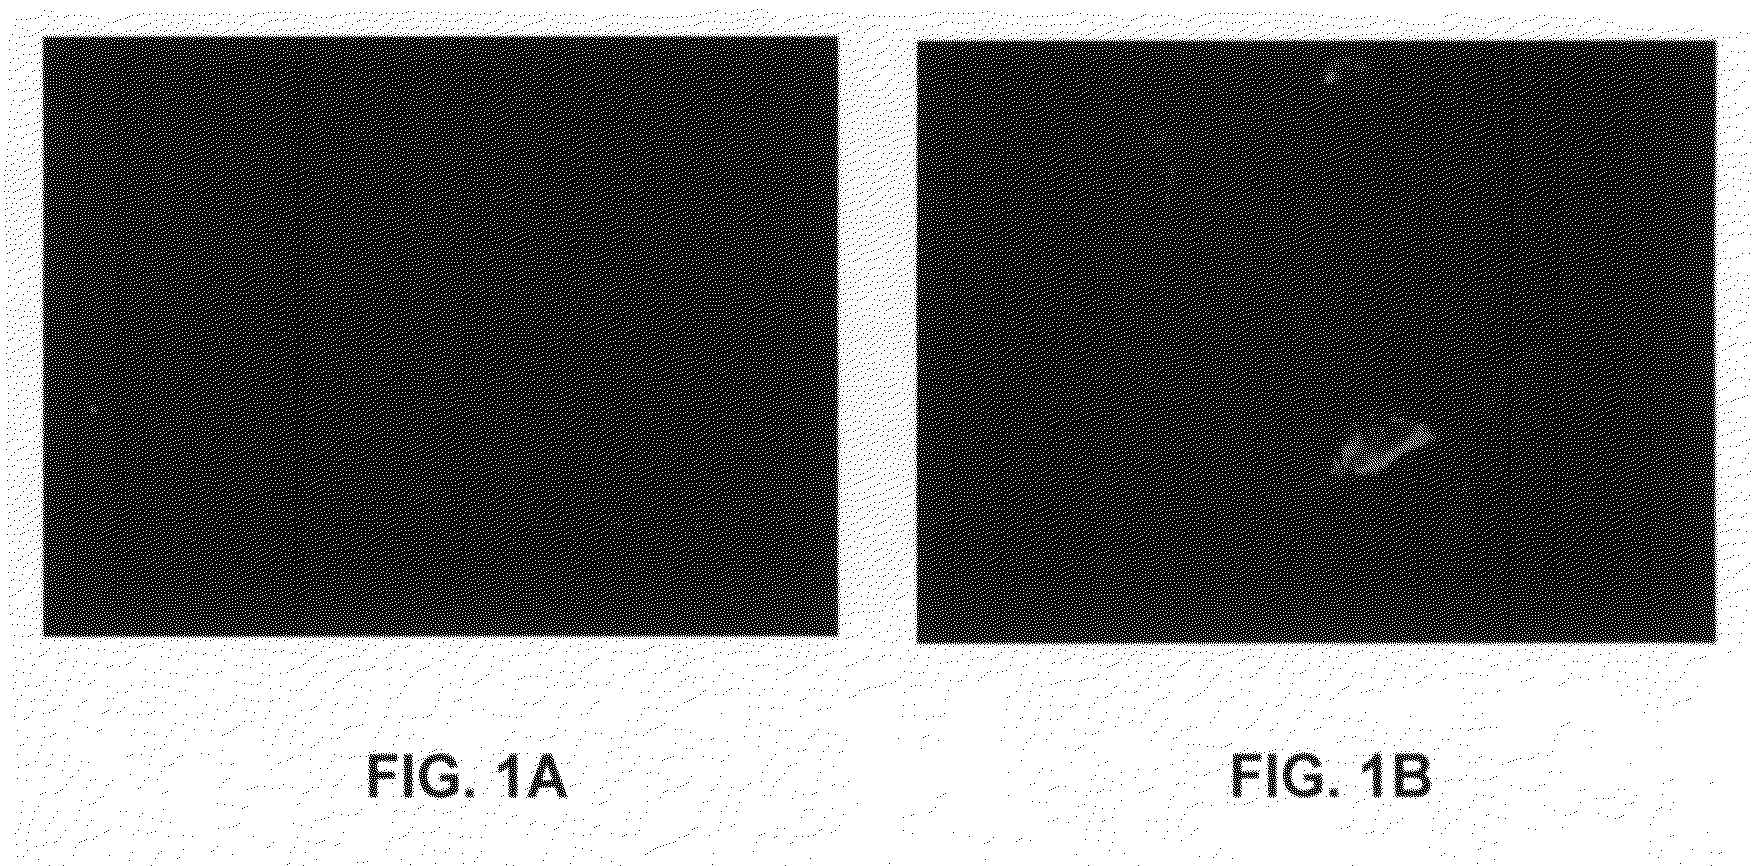 Methods of inhibiting smooth muscle cell migration and proliferation